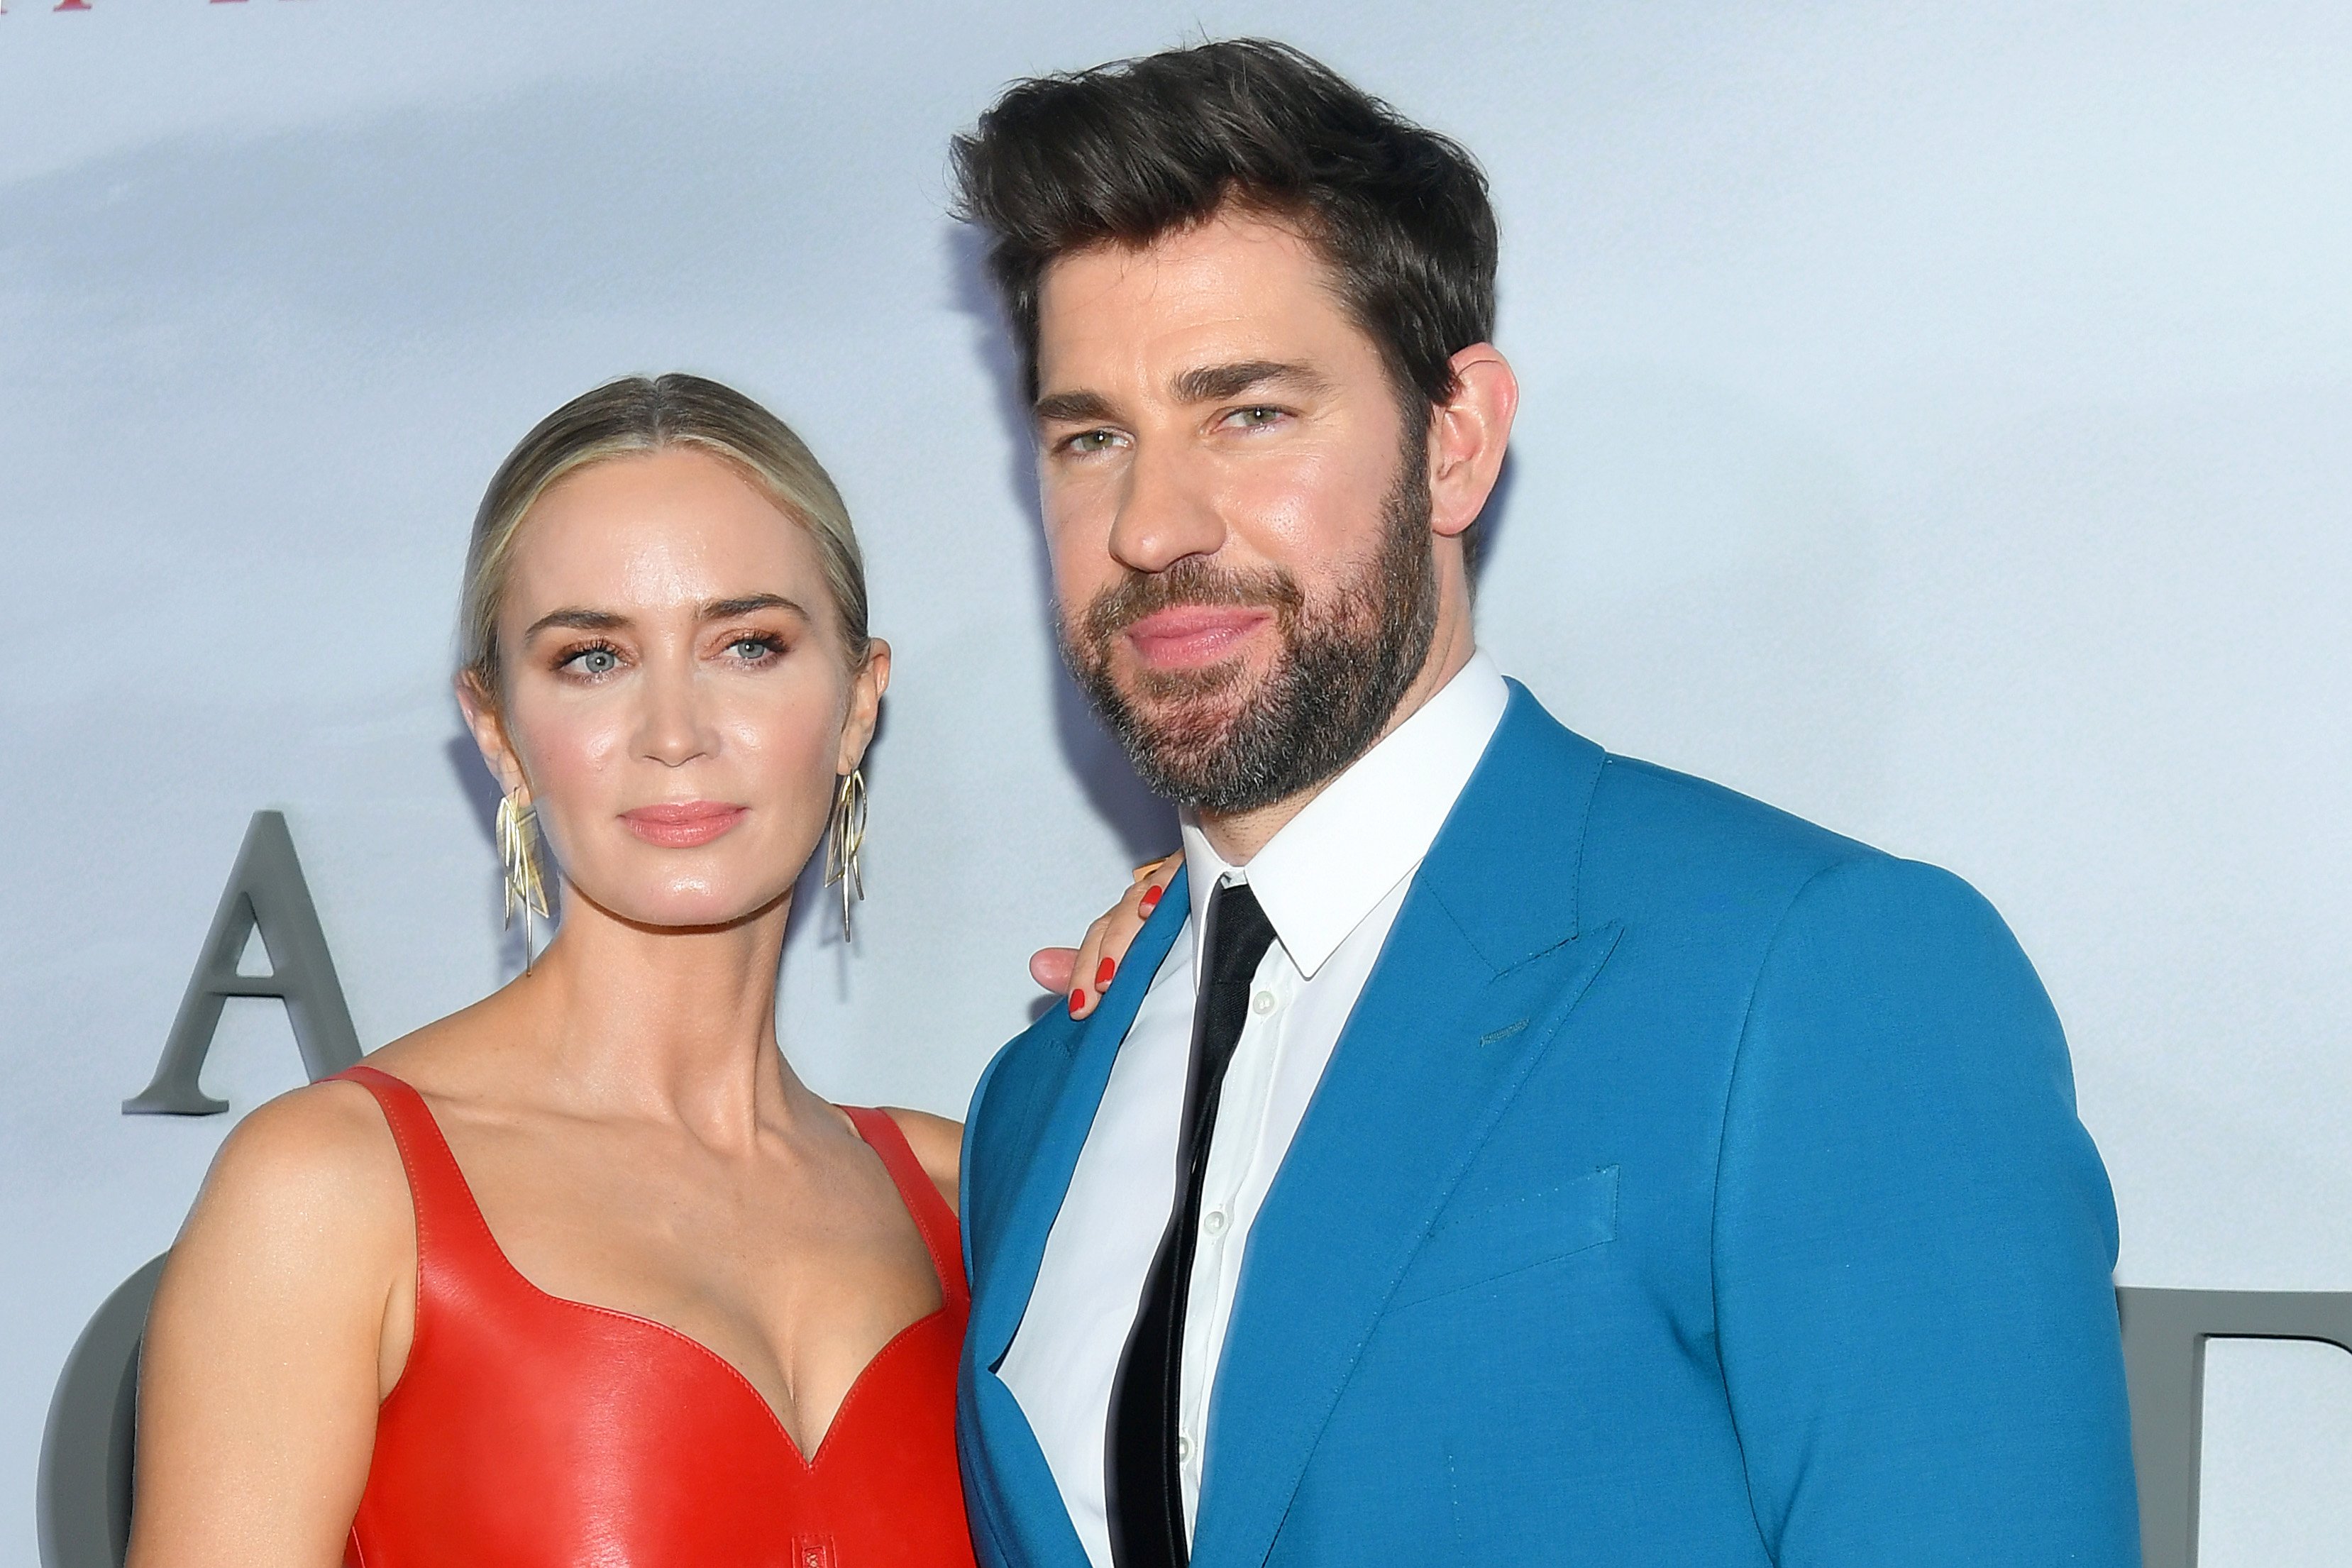 Emily Blunt and John Krasinski at the world premiere of "A Quiet Place Part II" on March 08, 2020, in New York | Source: Getty Images